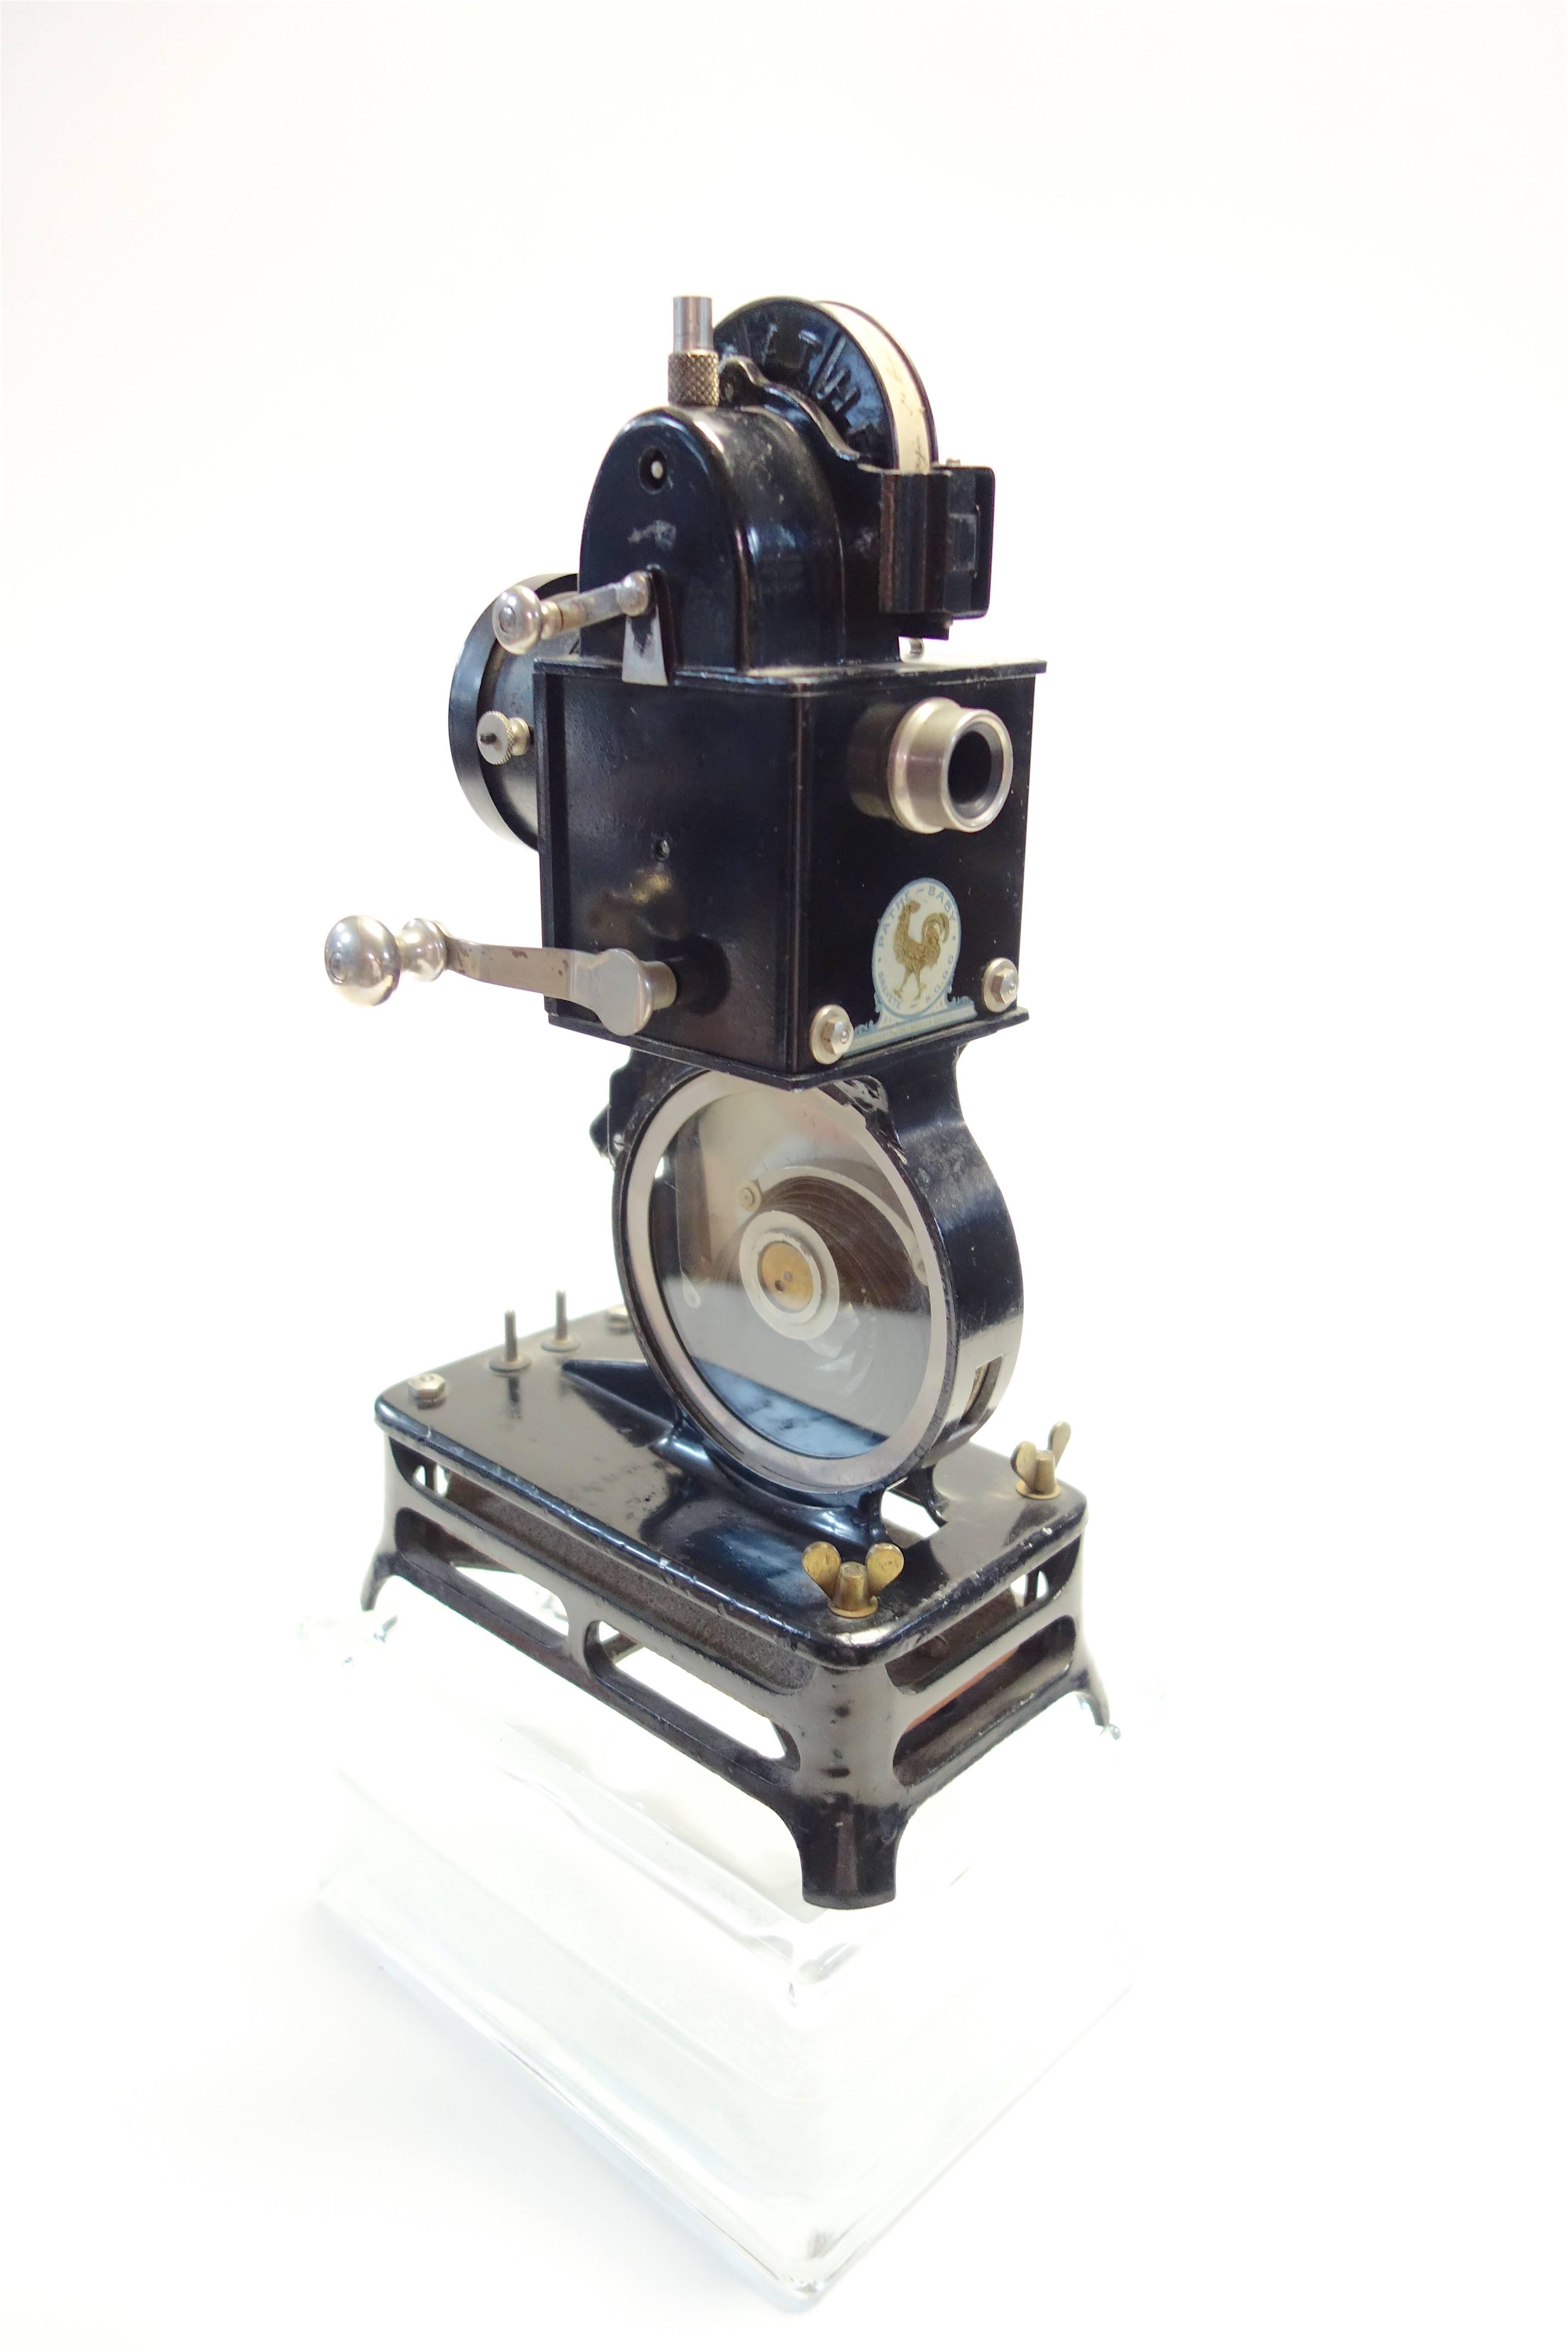 Offered for your approval is this, circa 1922 Pathe Baby hand crank cinema projector. Spectacular original condition and mounted on your choice of a glass or old stone display block.

Sold complete with original labels and an original reel of